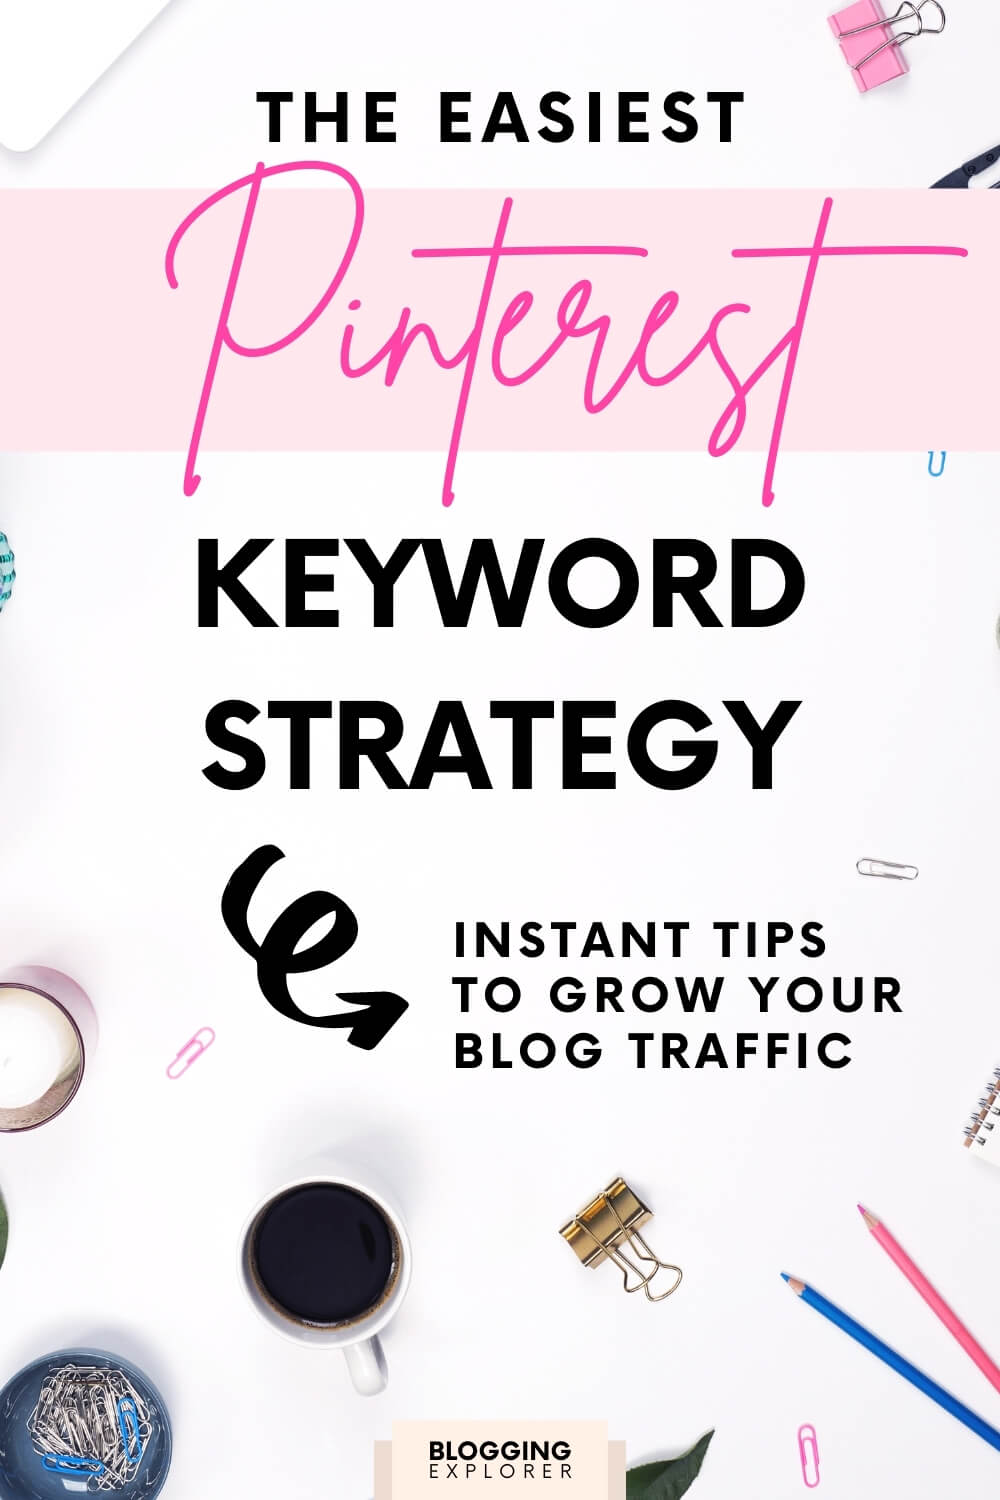 How to Find Powerful Pinterest Keywords to Grow Your Blog in 2021